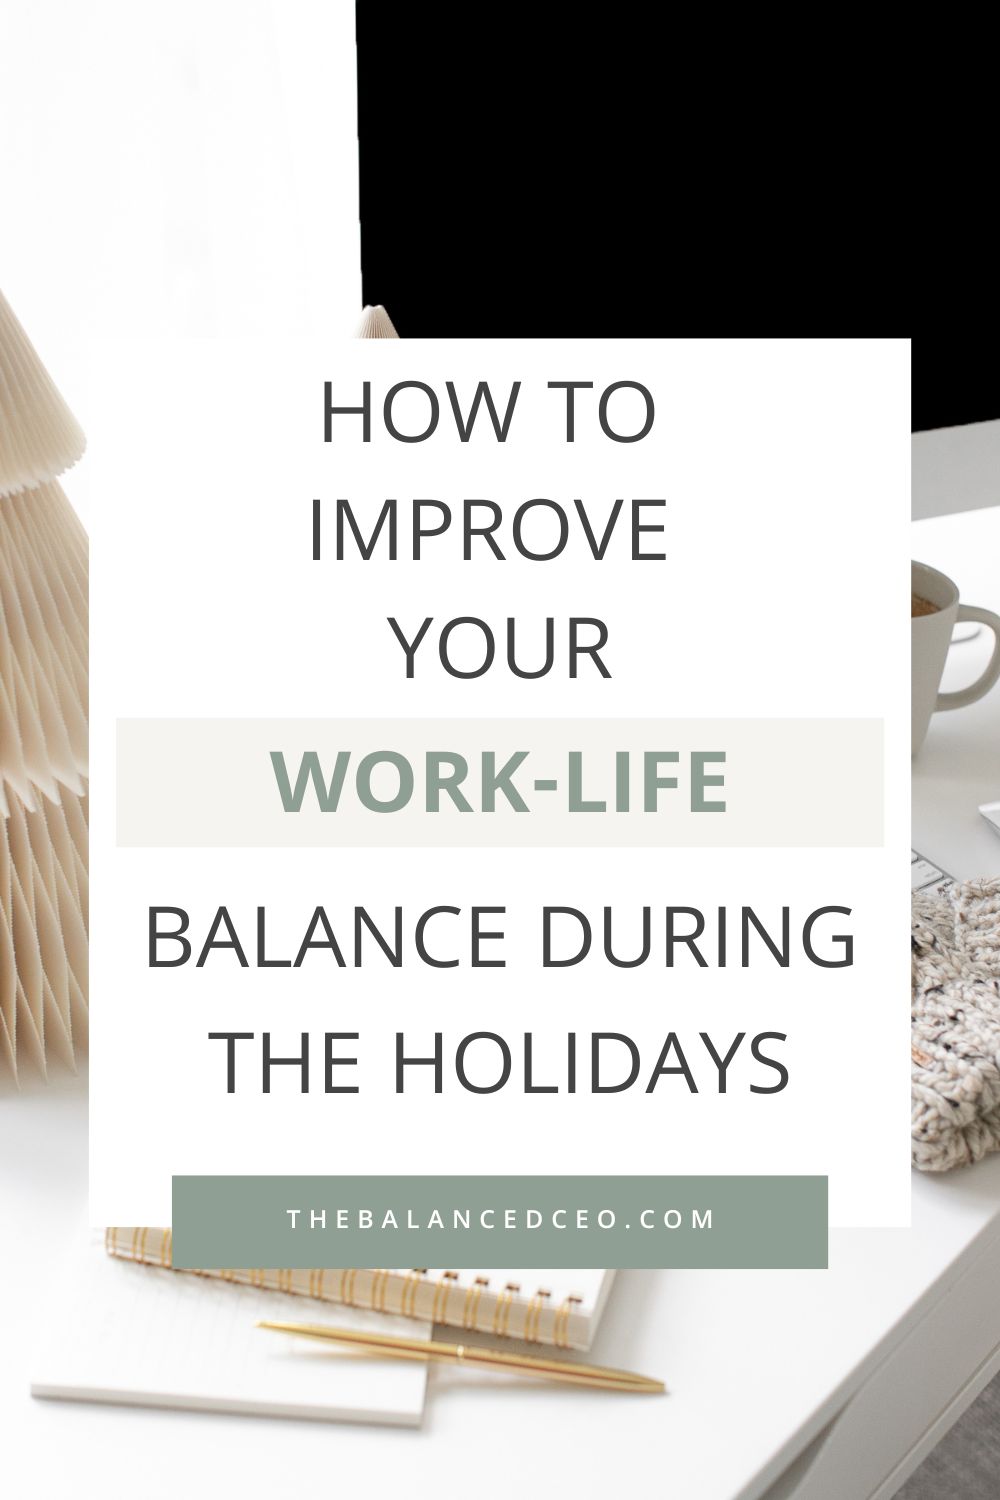 6 Tips to Improve Your Work-Life Balance During the Holidays